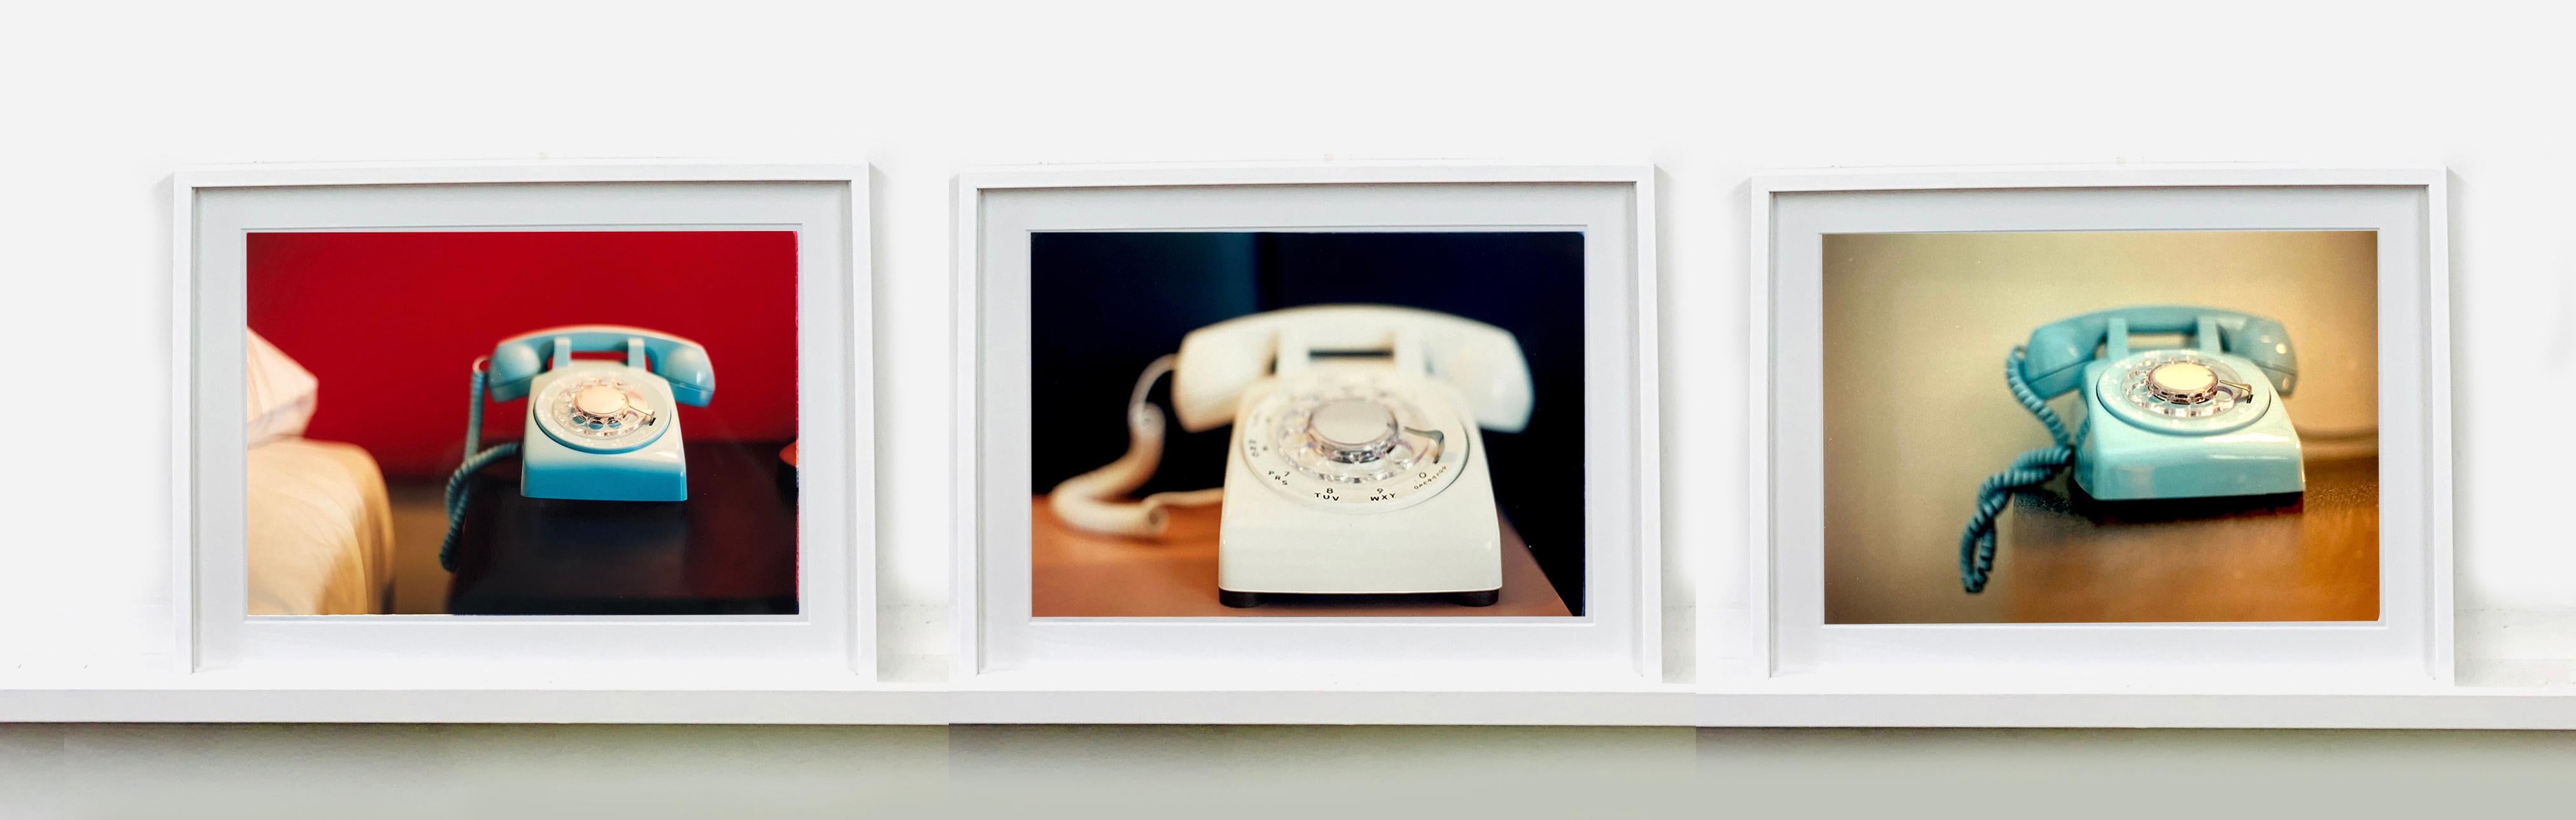 Telephone V, Ballantines Movie Colony, Palm Springs - Interior Color Photography For Sale 2